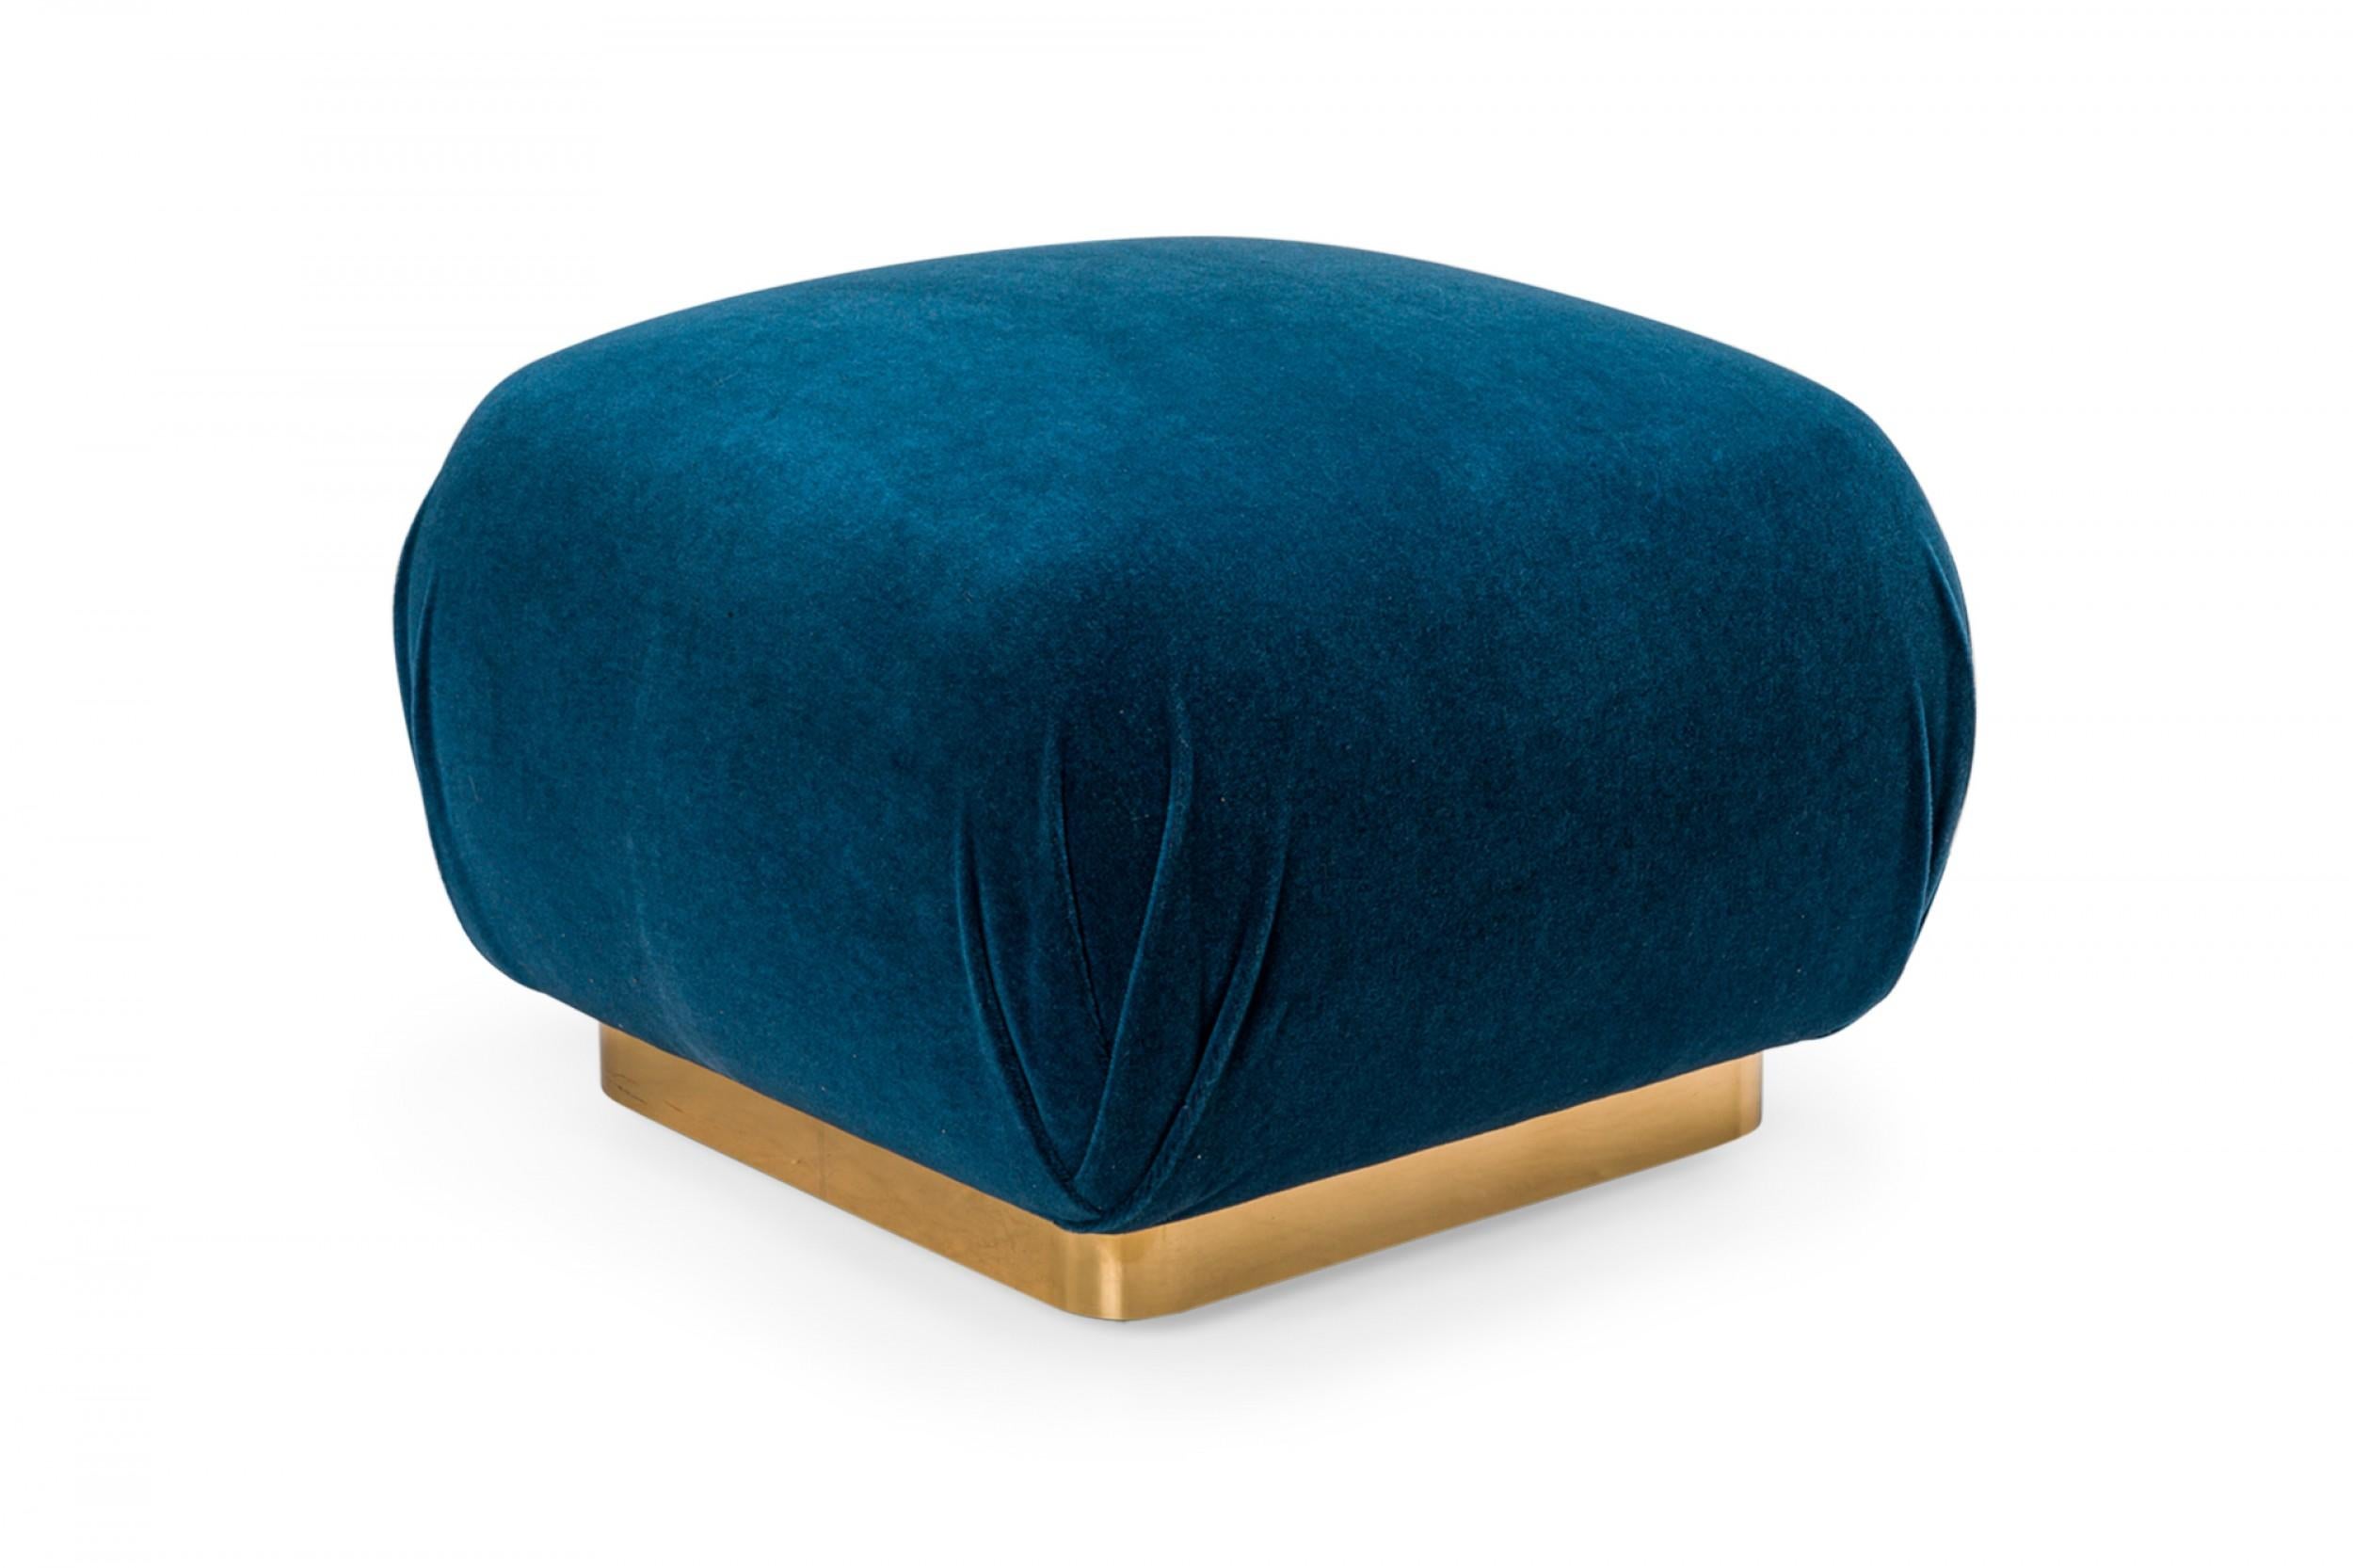 American mid-century 'Souffle' ottoman with blue velvet upholstery with a square gilt steel base. (Karl Springer)